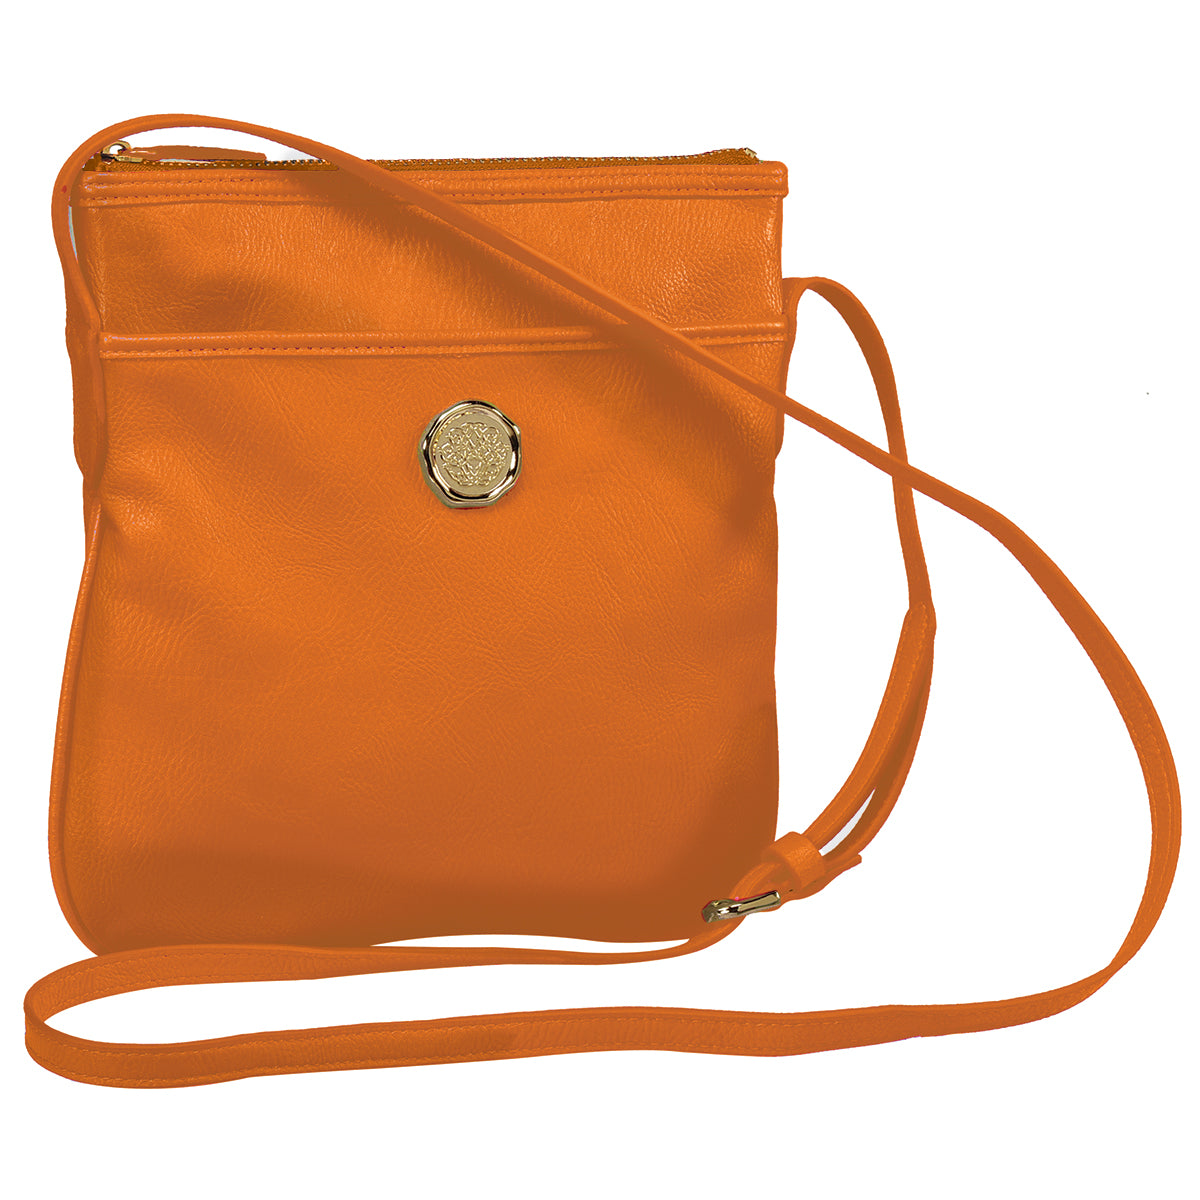 an orange purse with a gold button on the front.